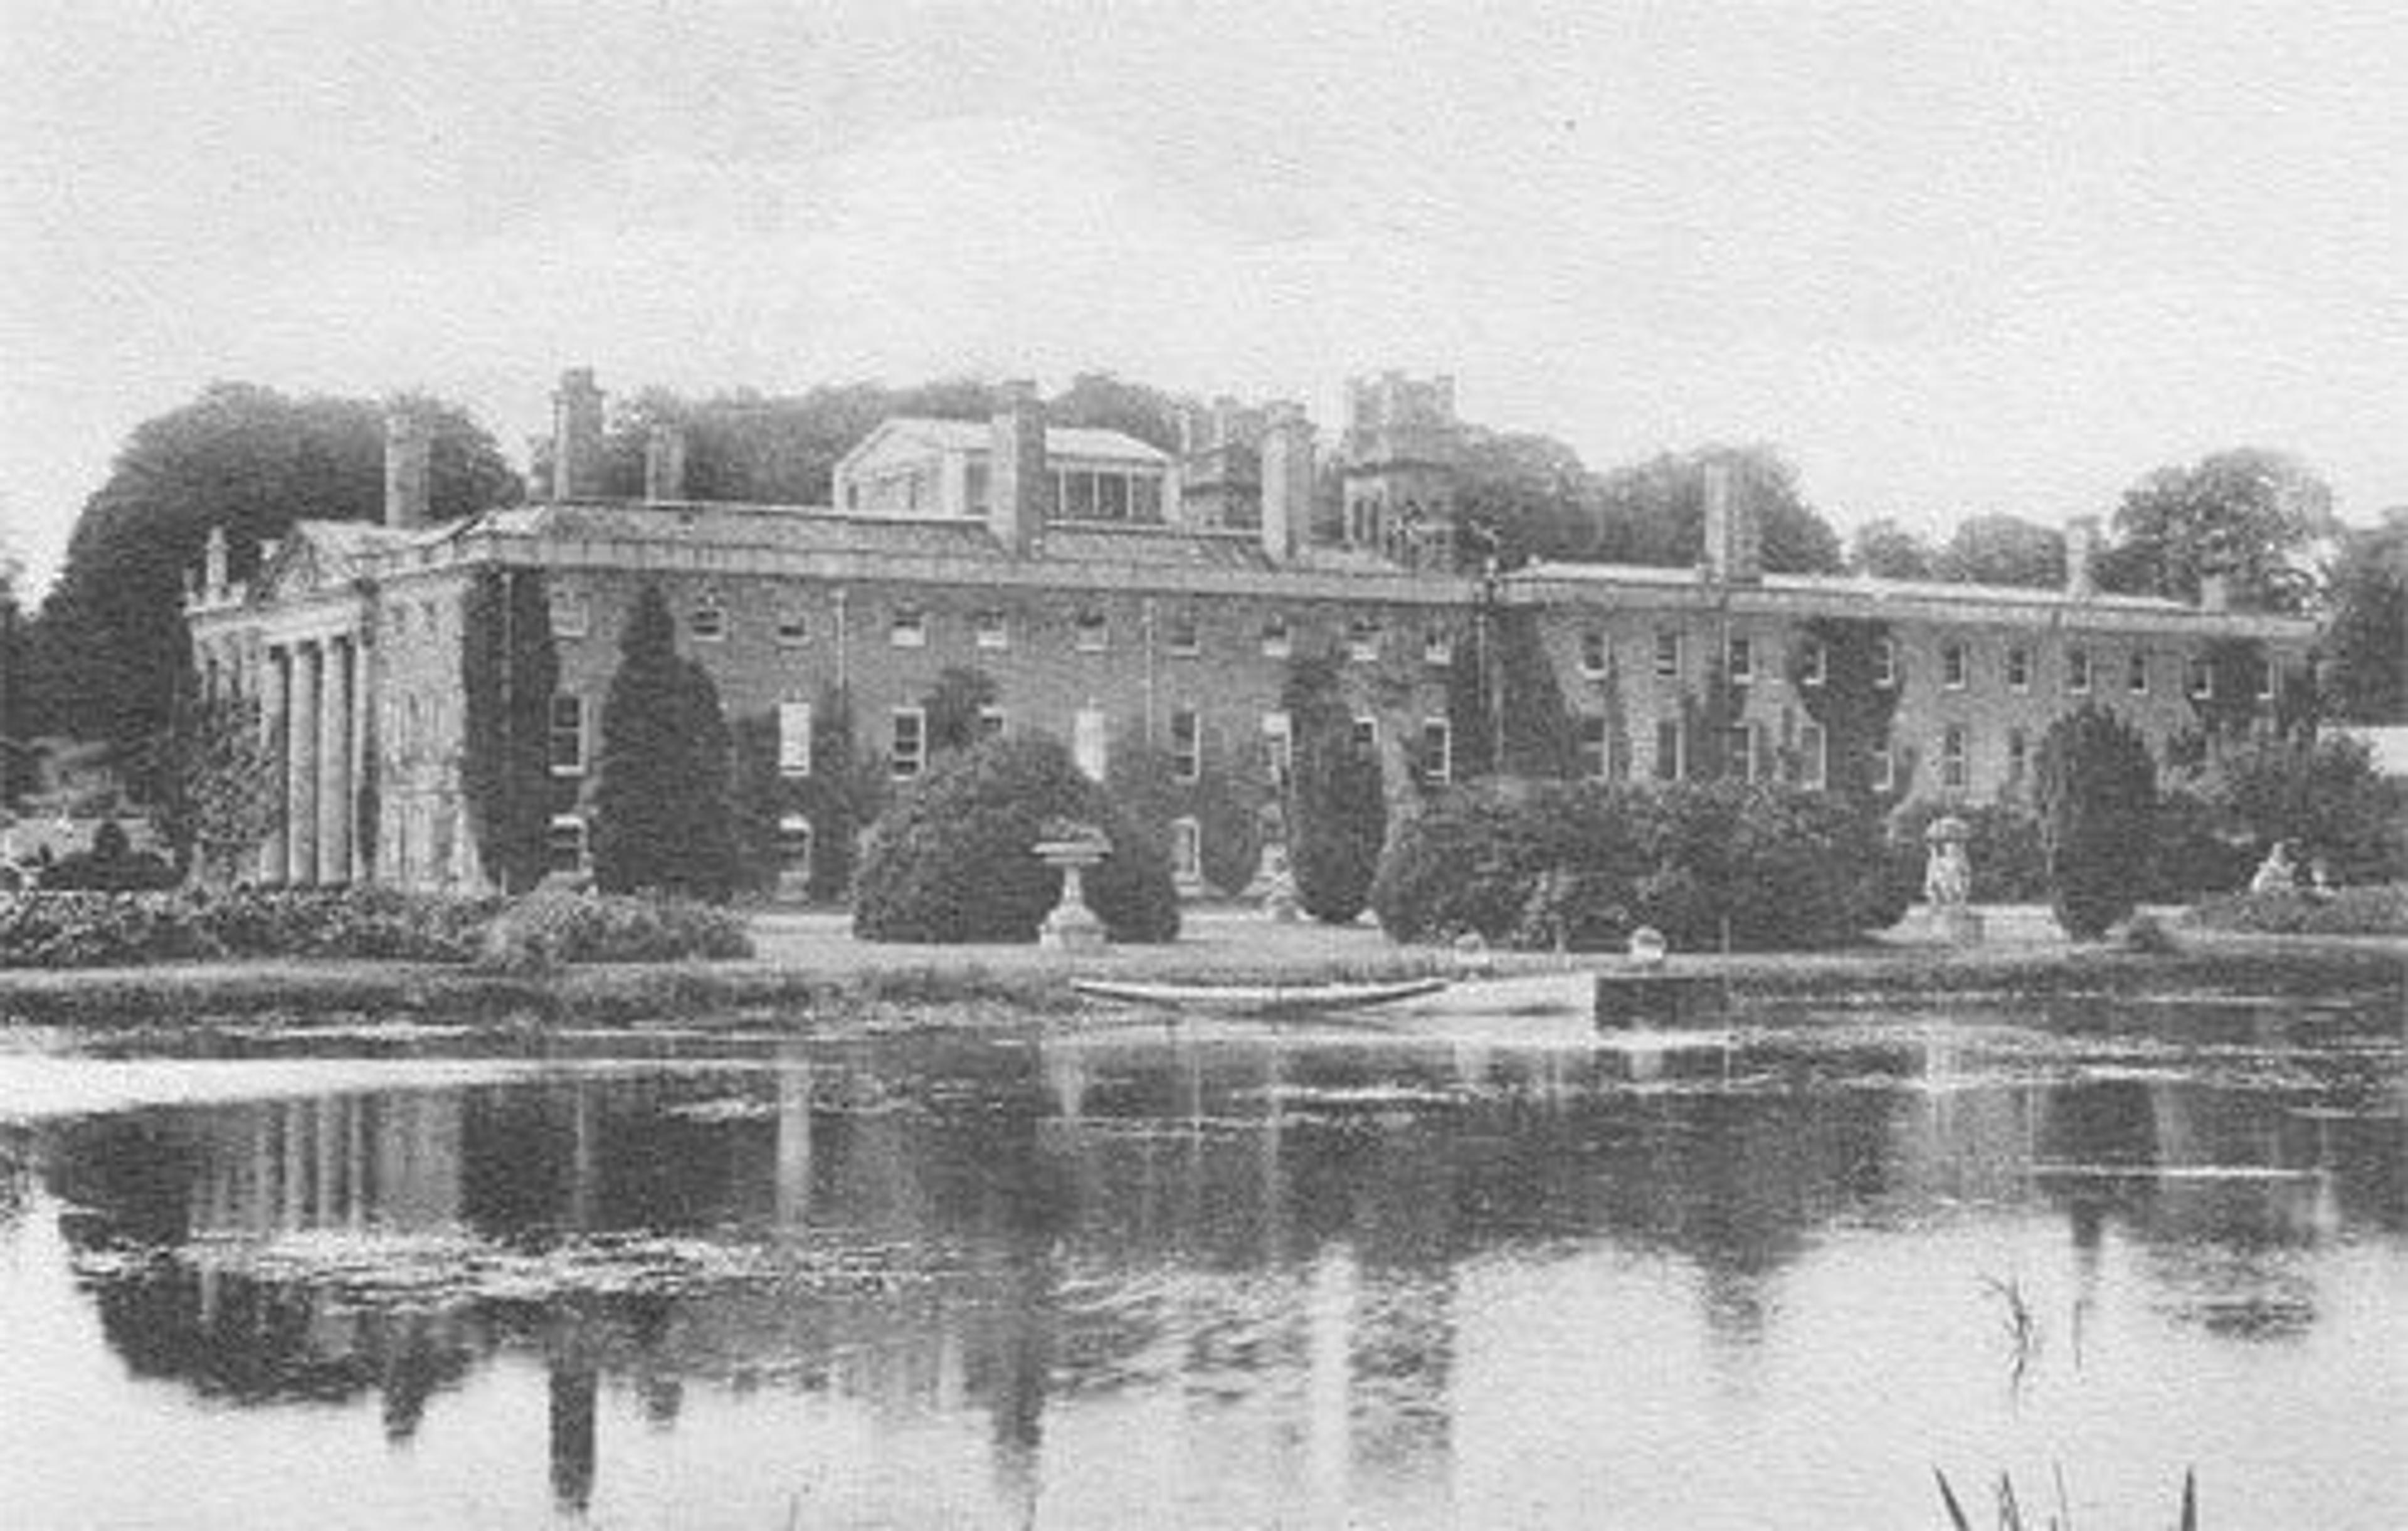 Olantigh Towers prior to the 1903 fire